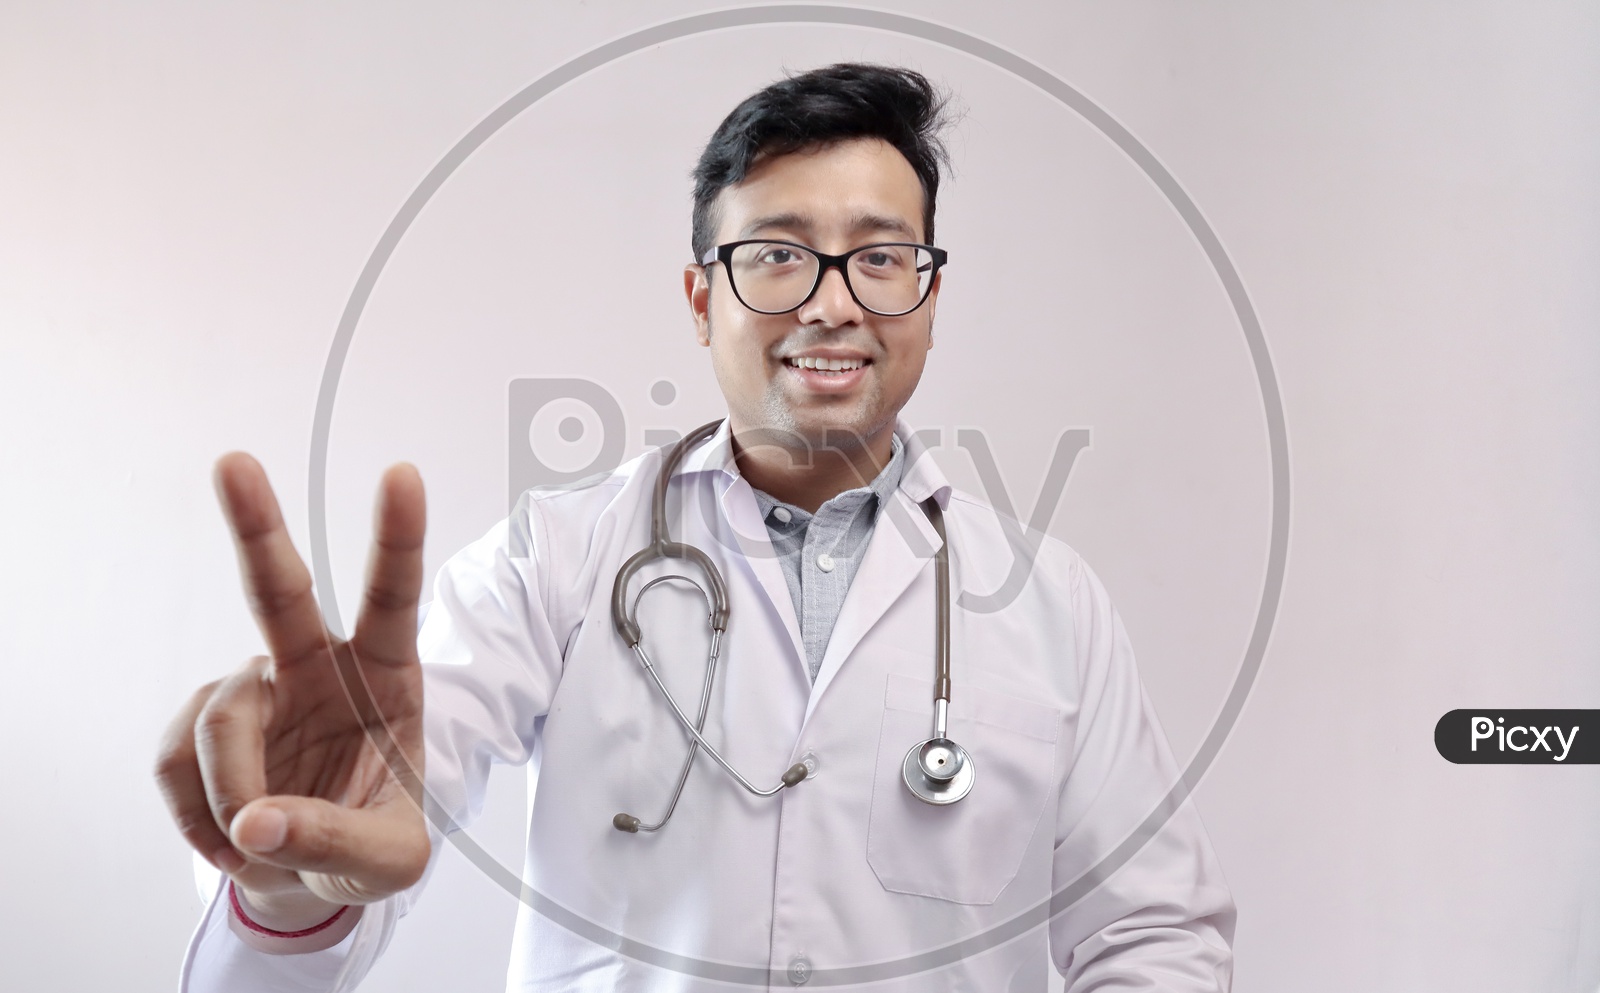 Male Indian Doctor In White Coat And Stethoscope Showing Victory Sign In Confidence